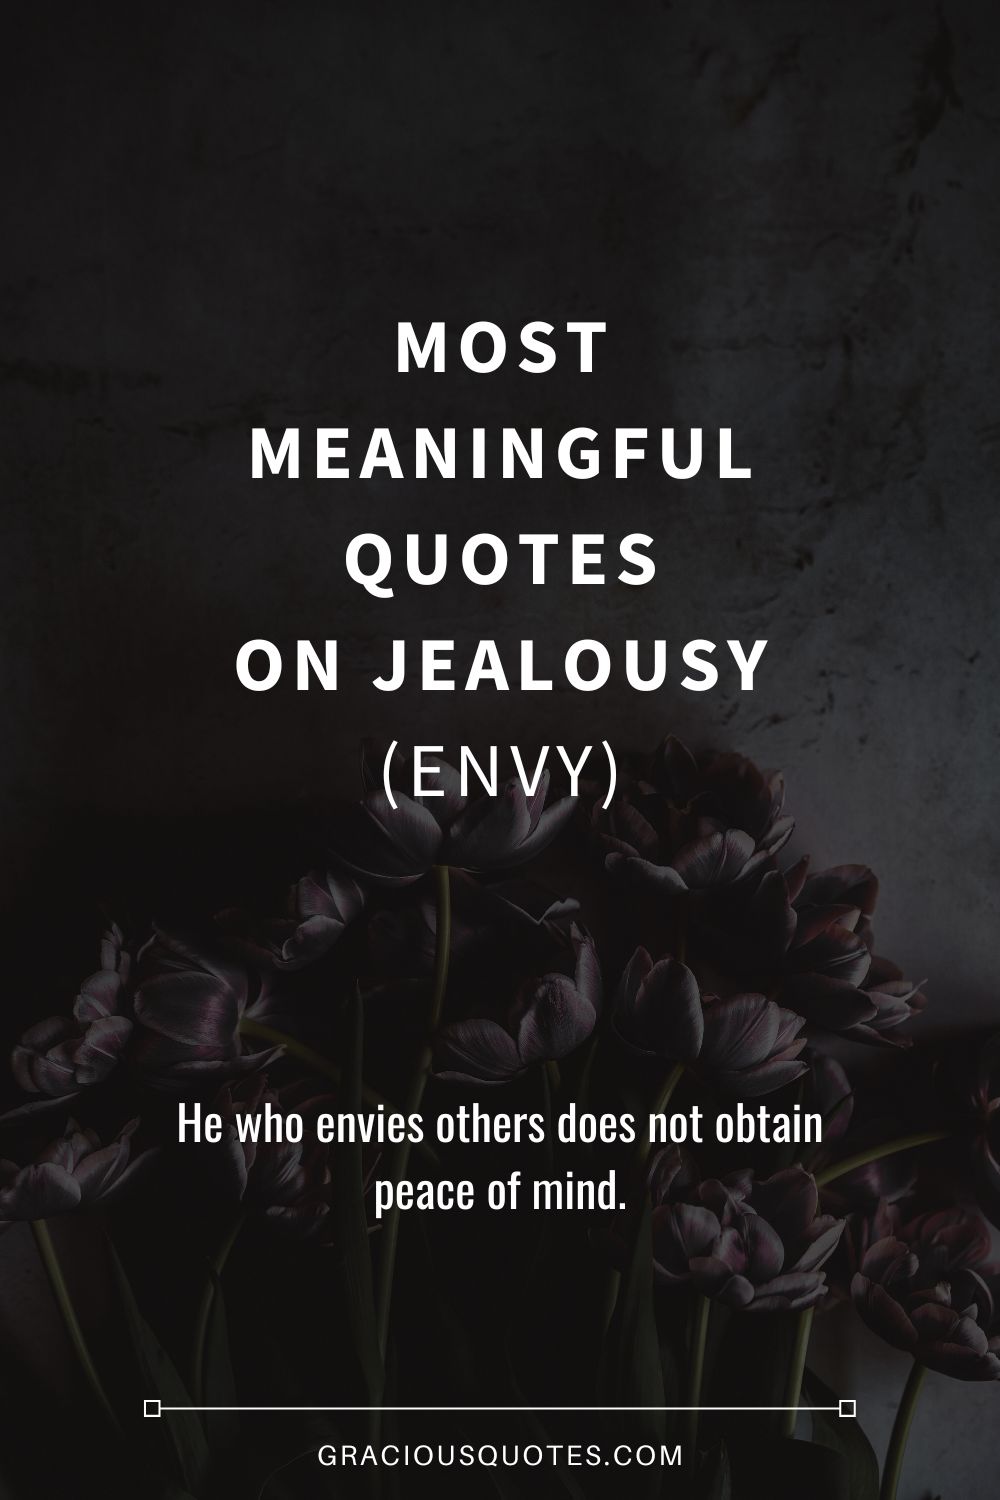 Most Meaningful Quotes on Jealousy (ENVY) - Gracious Quotes